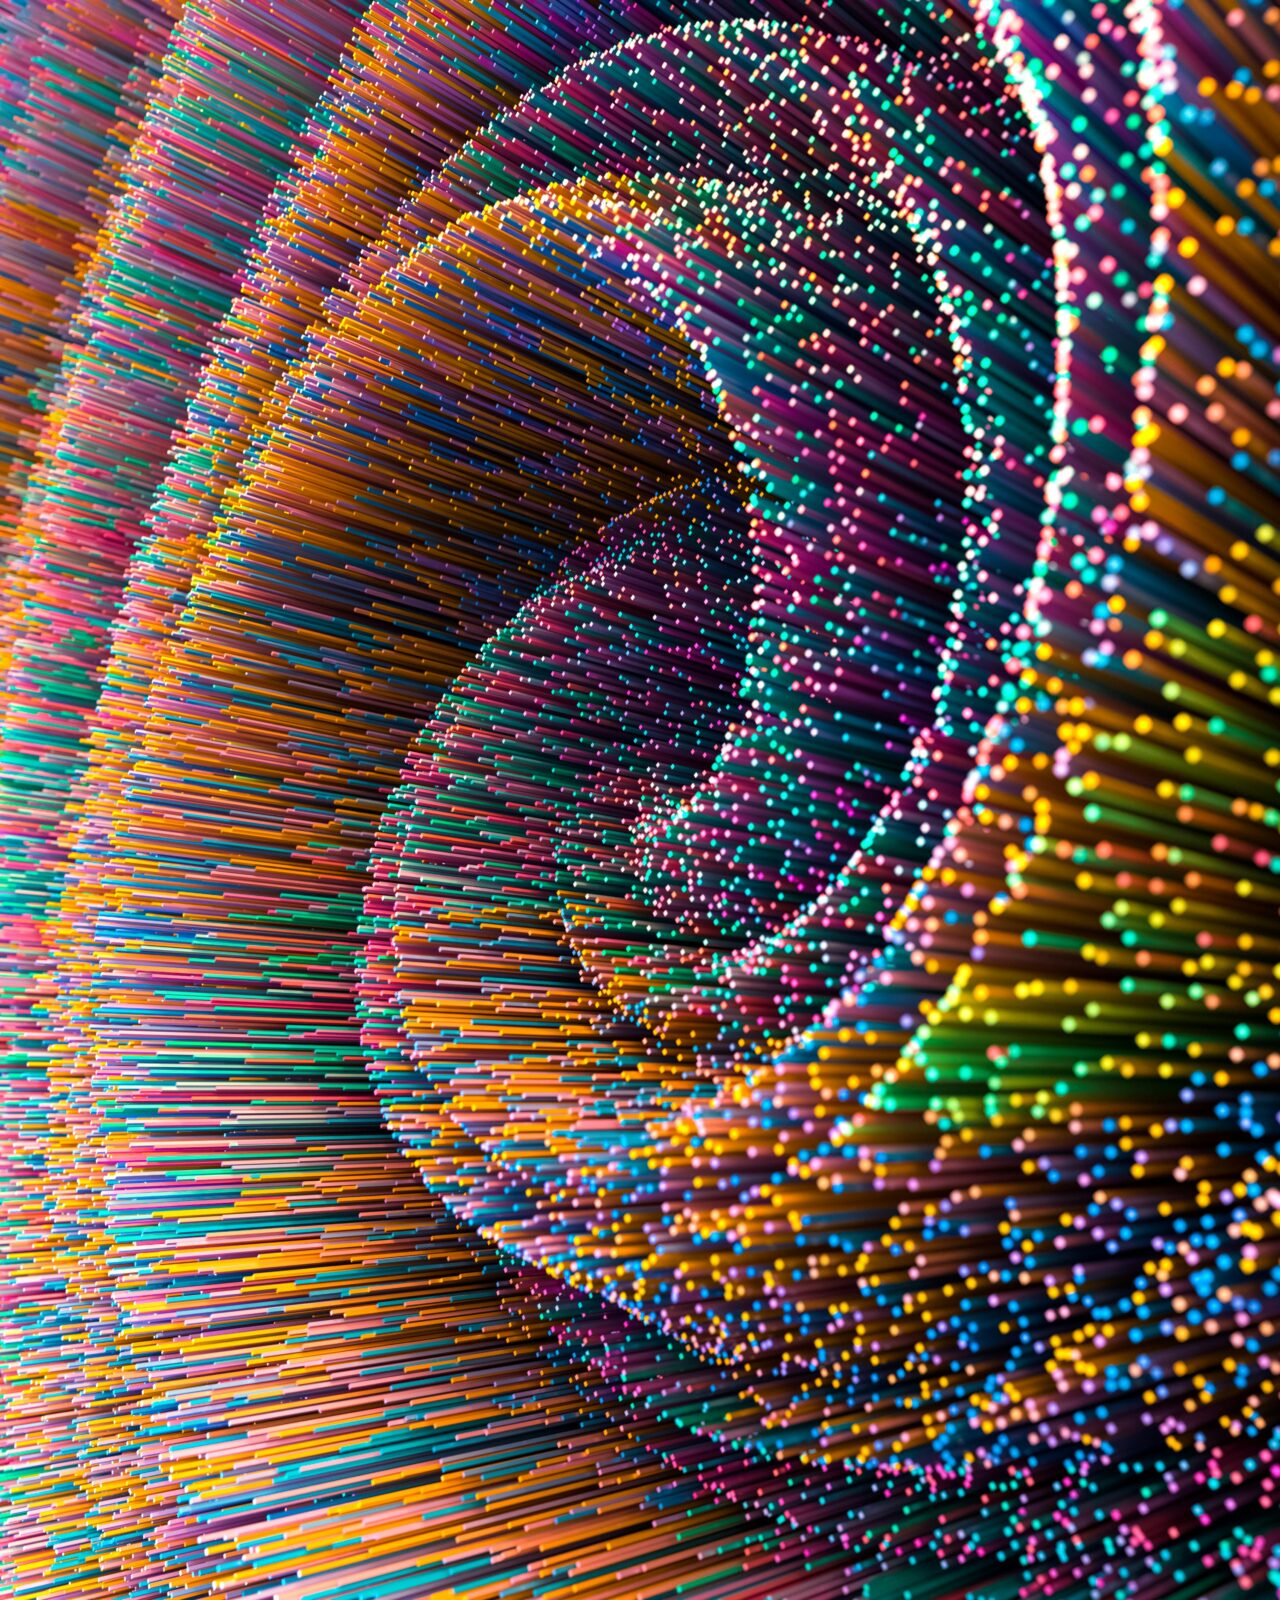 A colorful spiral